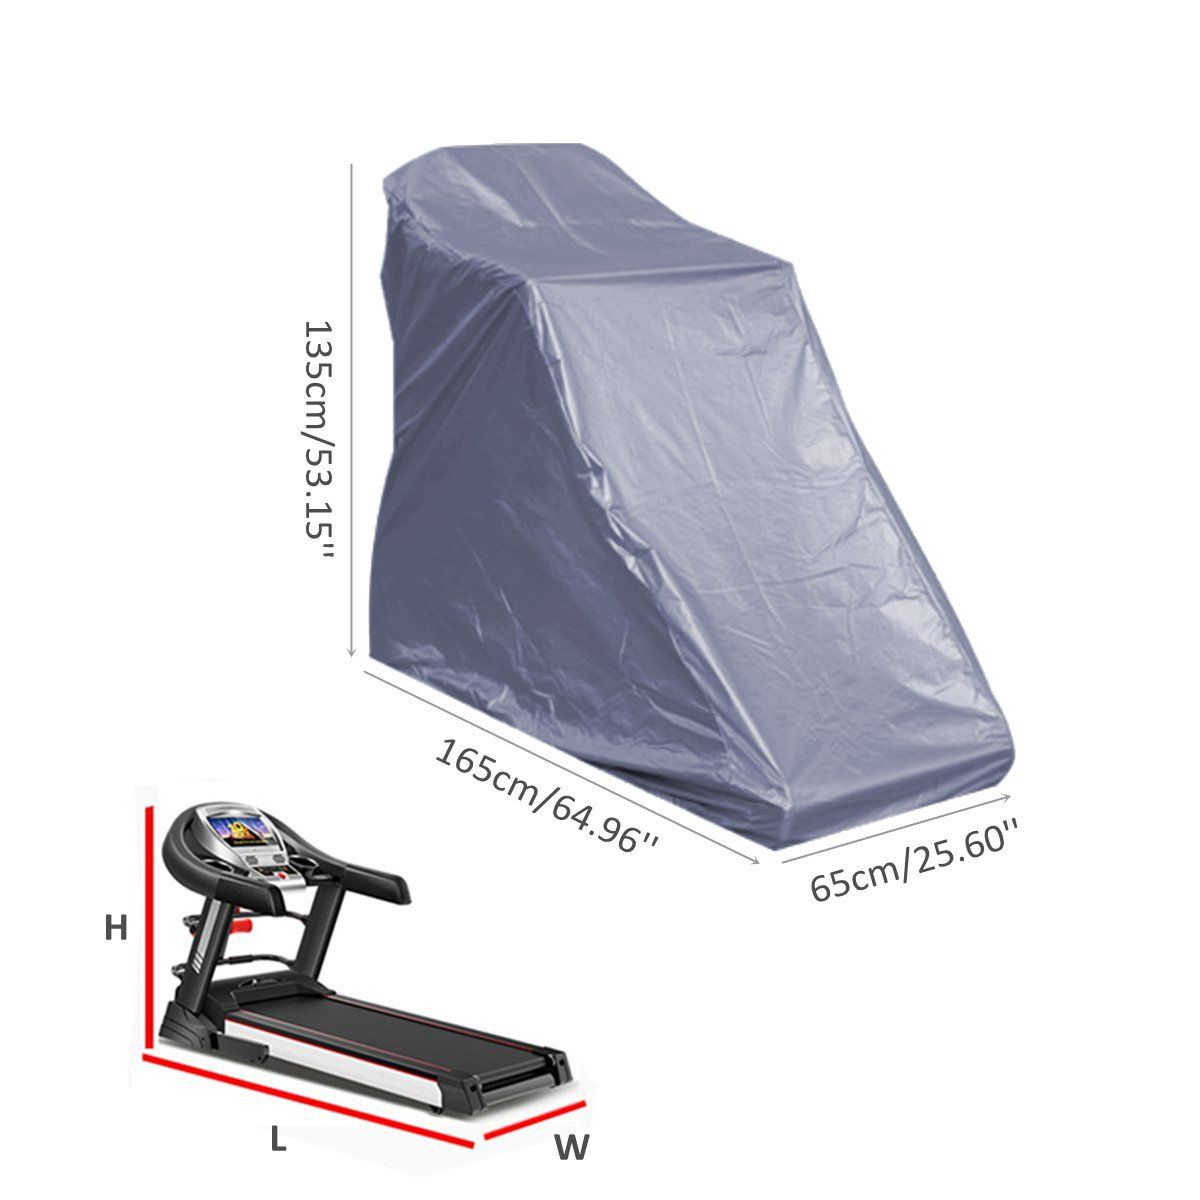 165x65x135cm-Waterproof-Treadmill-Cover-Running-Jogging-Machine-Dust-Shelter-Protection--1351838